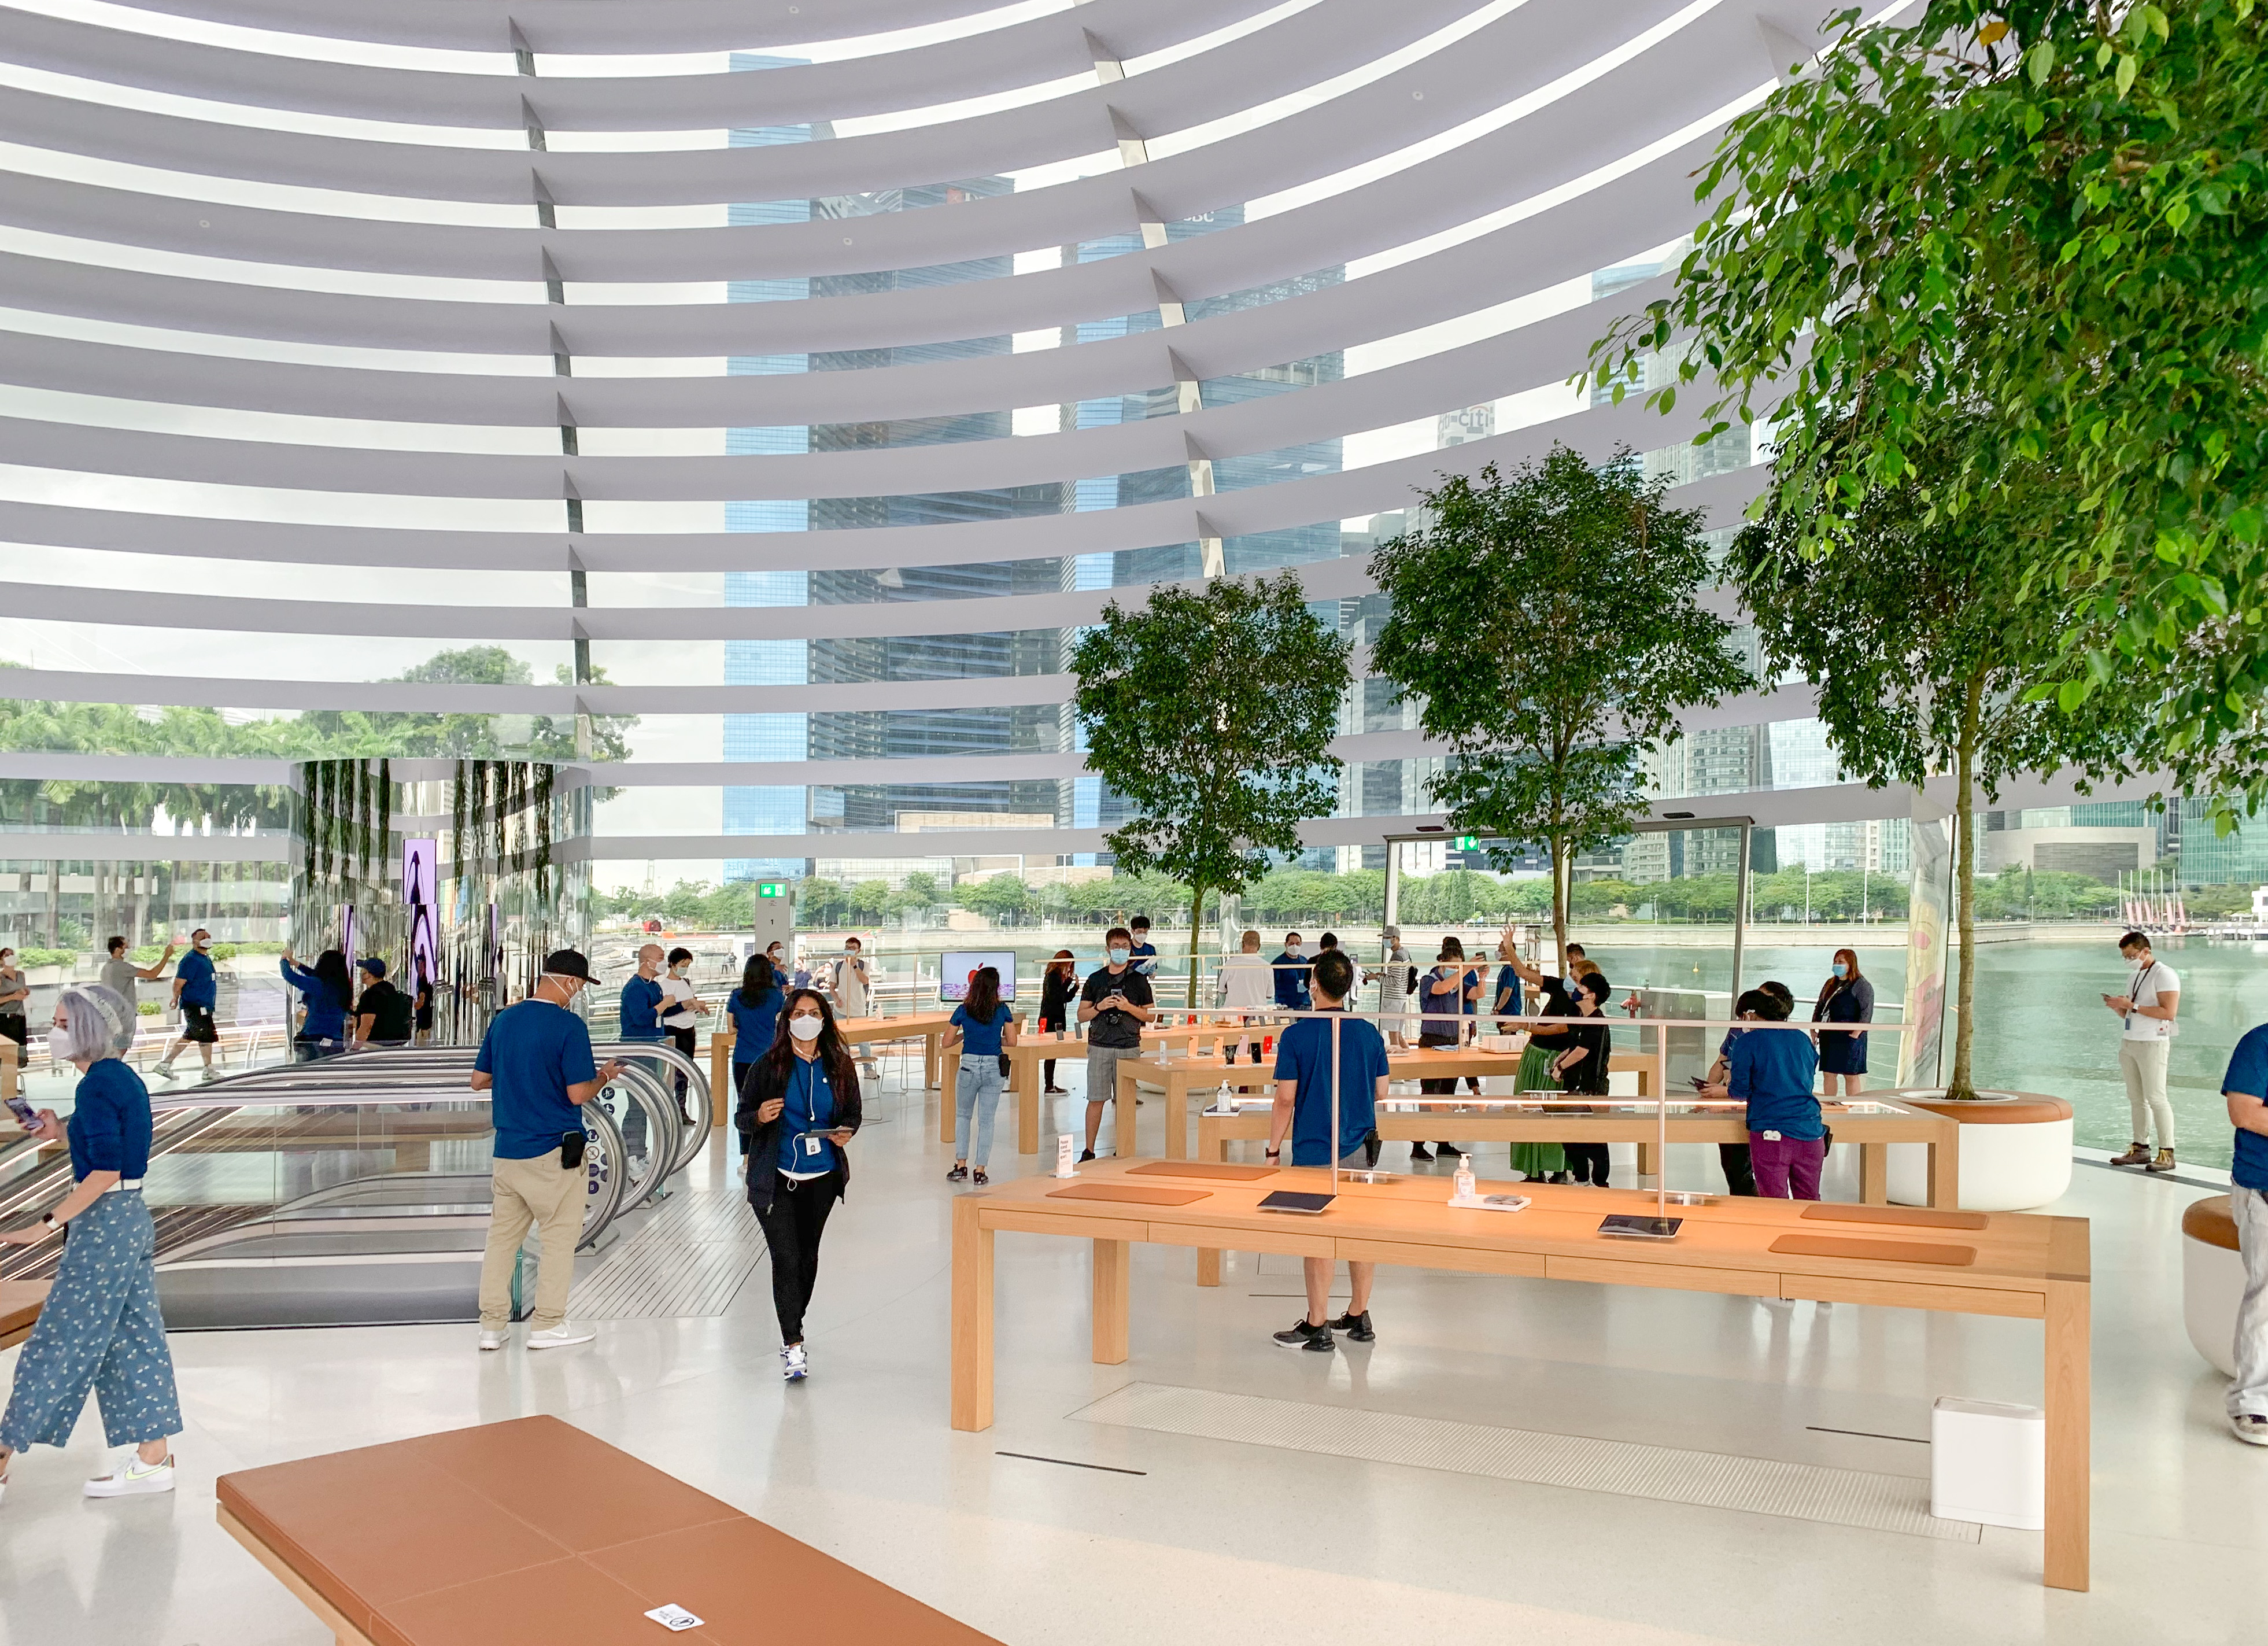 In pictures: Journey to the new Apple's core at Marina Bay Sands